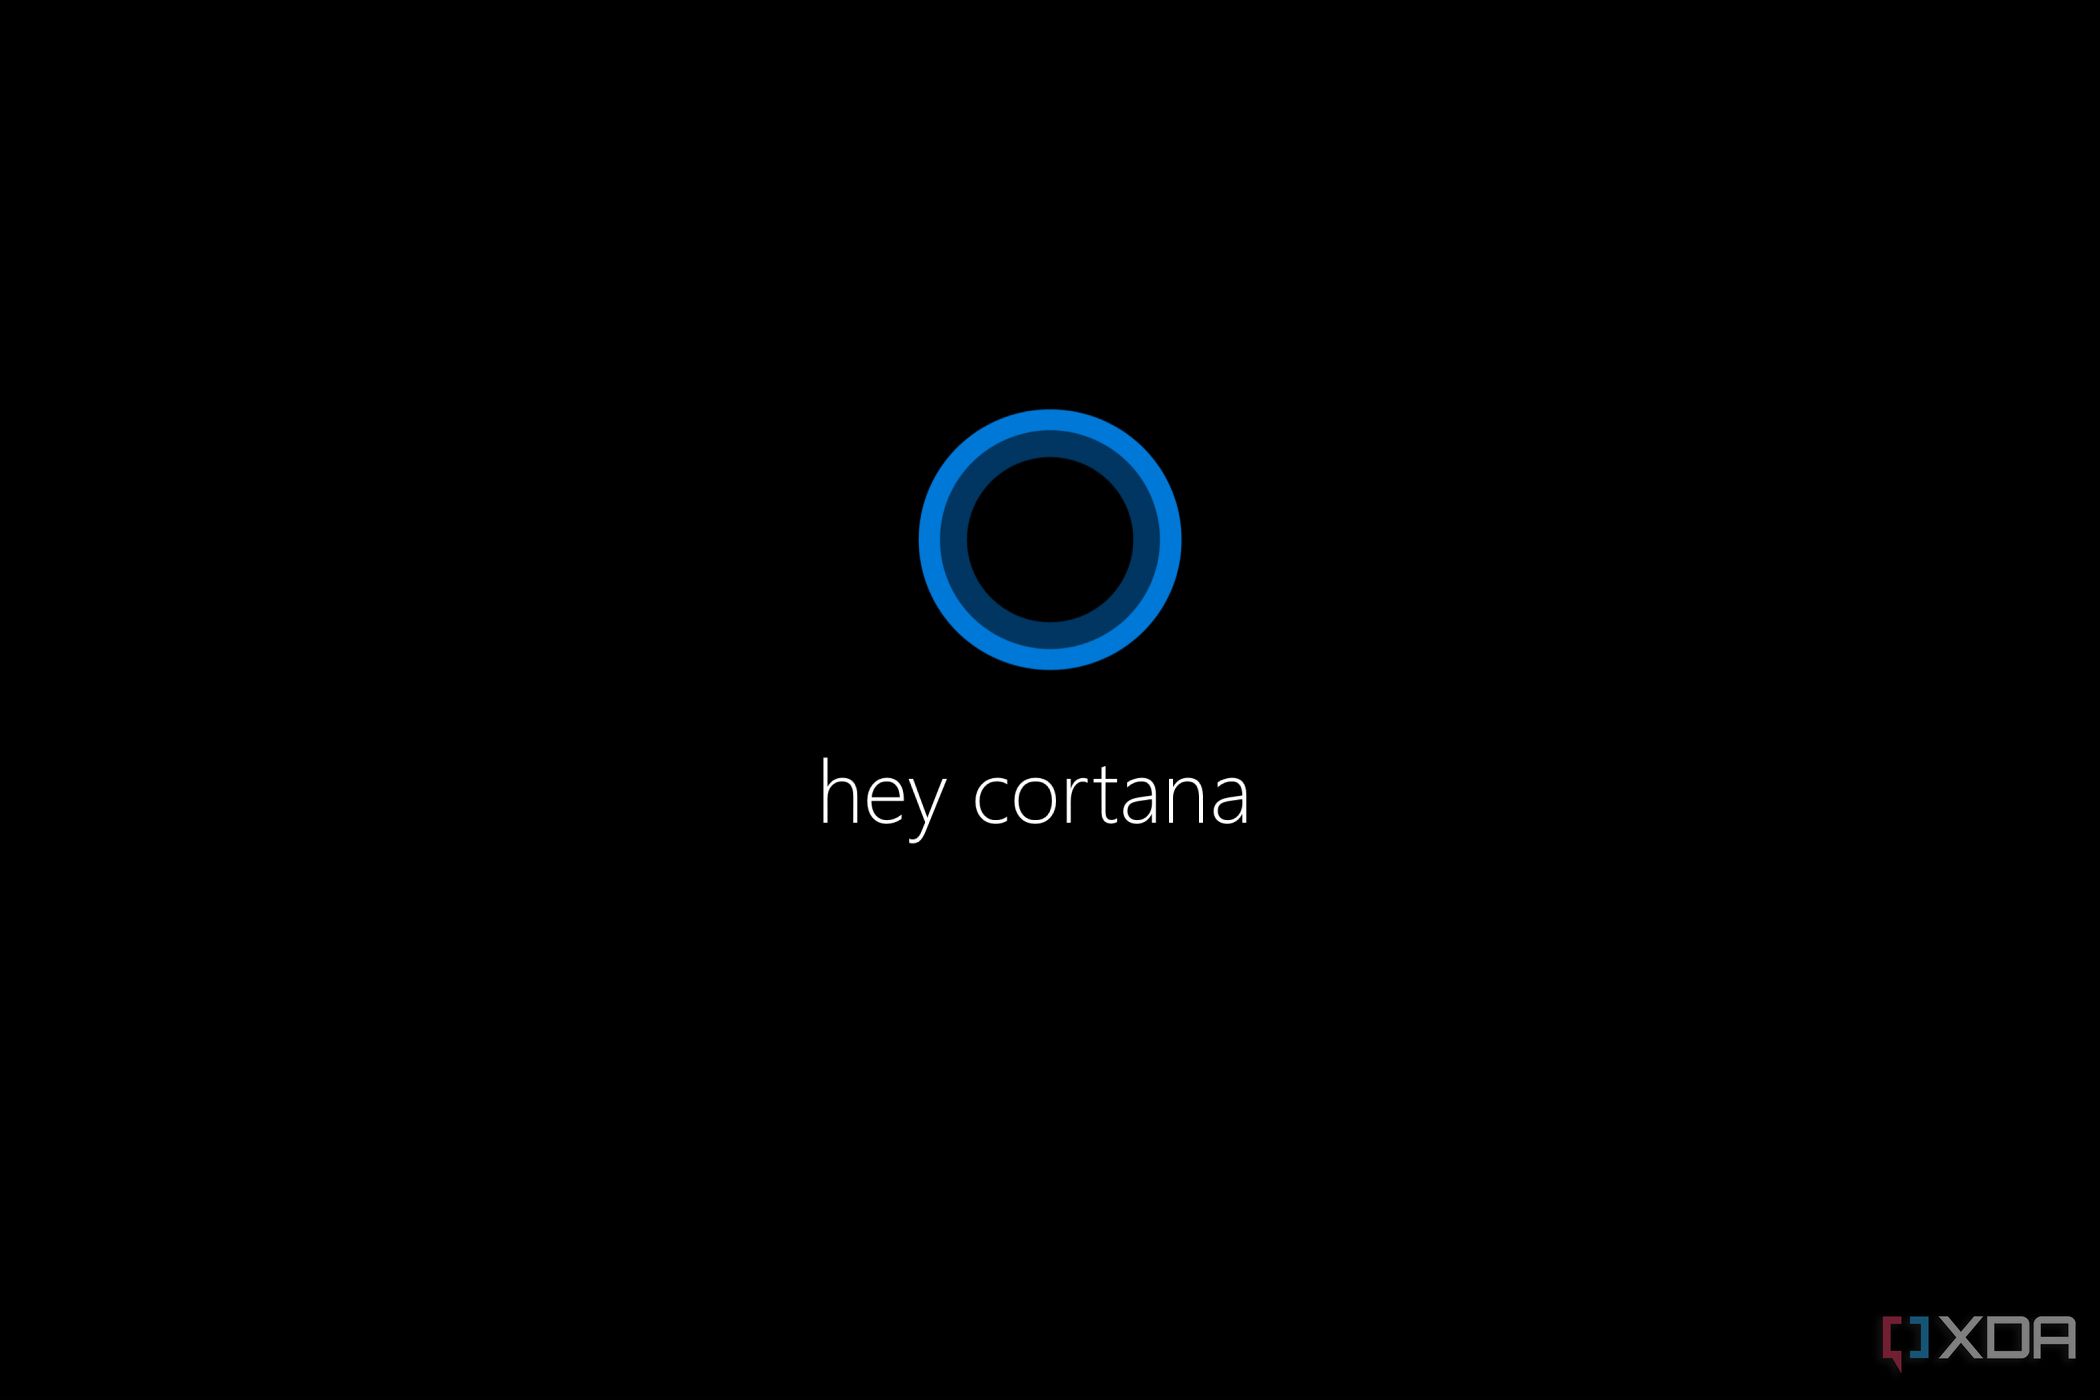 On this day 10 years ago, Cortana landed on Windows Phone as a digital assistant